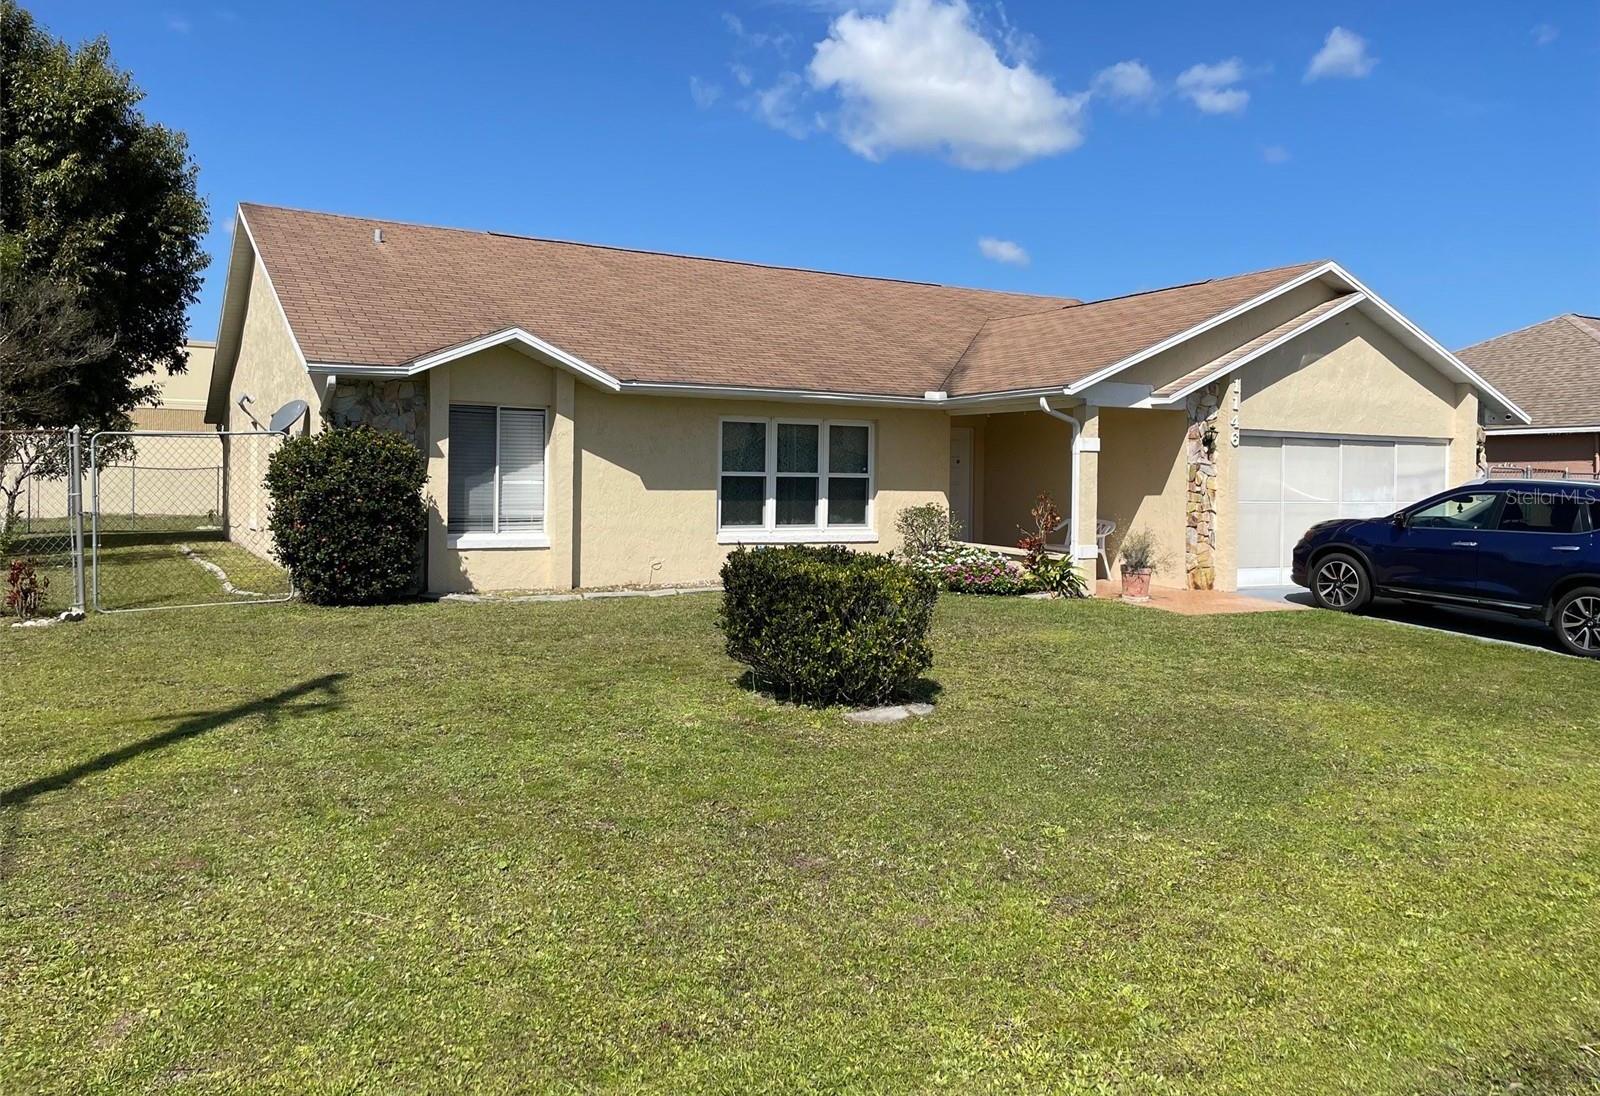 Photo one of 1146 Chesterfield Ct Kissimmee FL 34758 | MLS S5100368